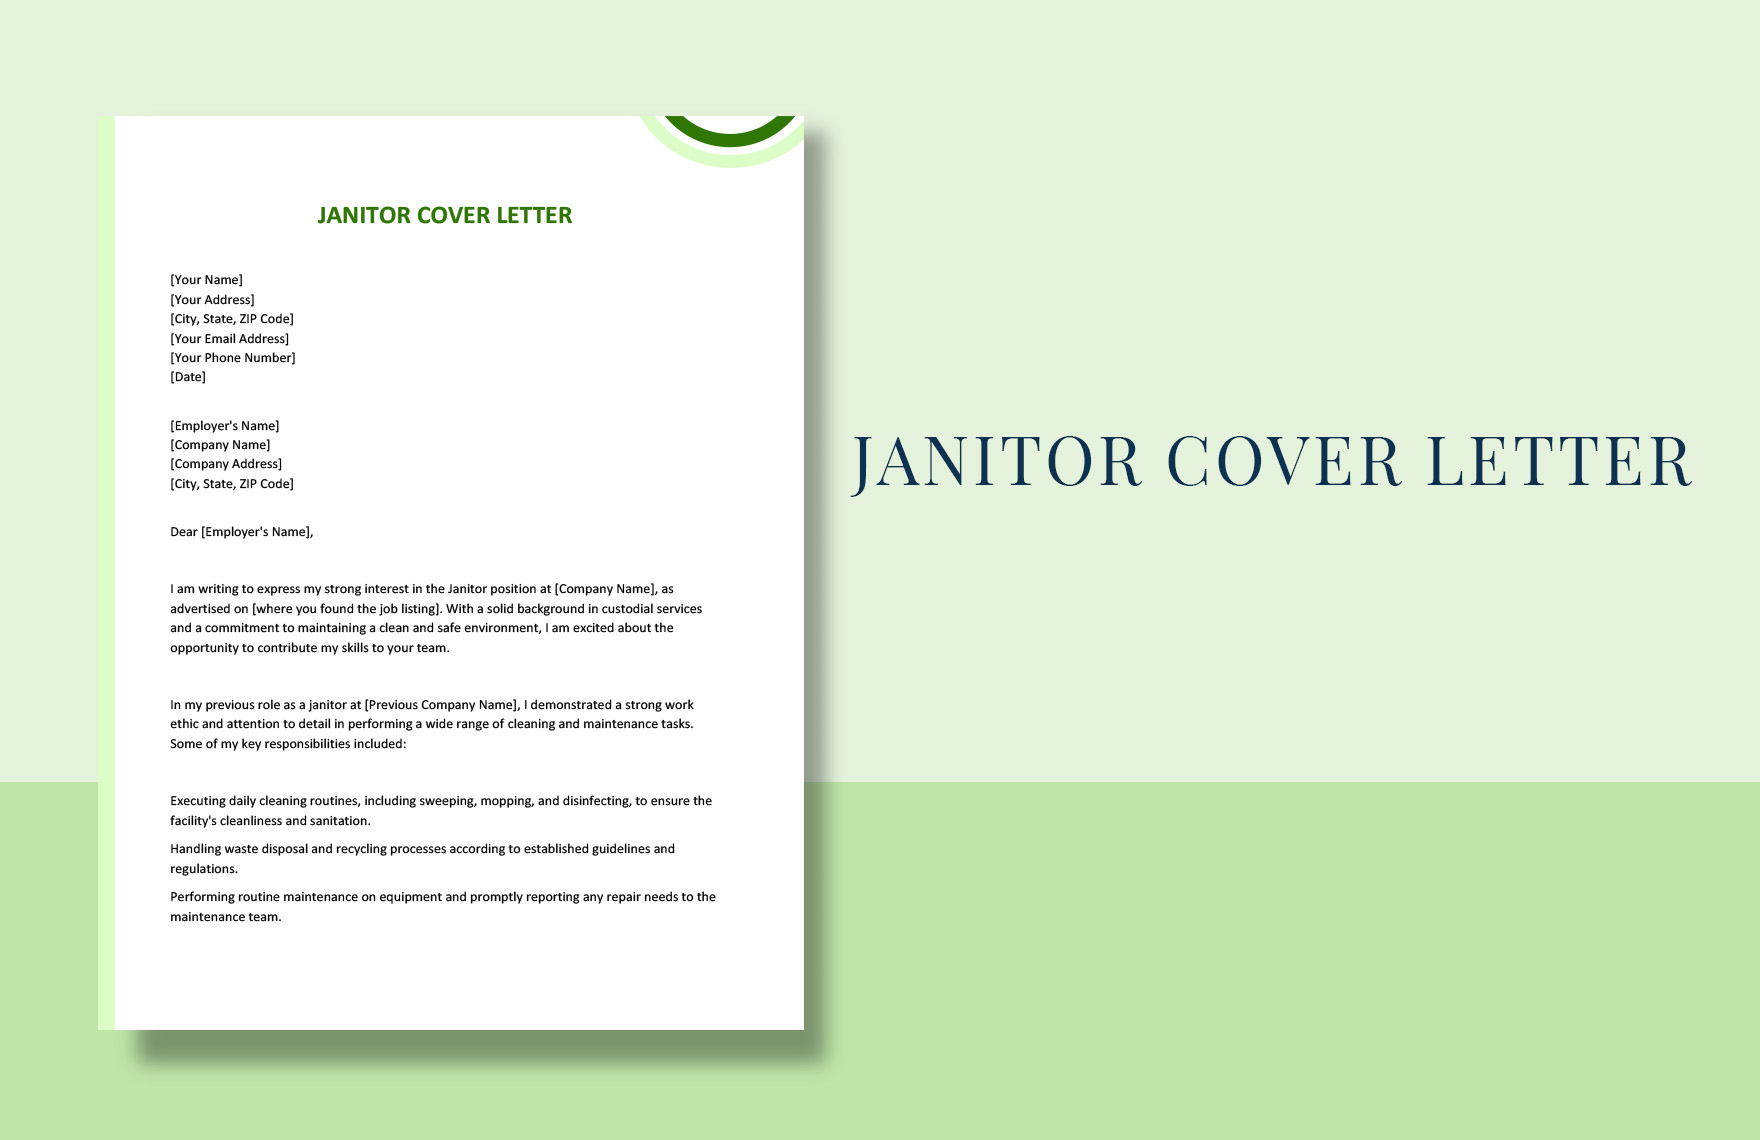 Janitor Cover Letter in Word, Google Docs